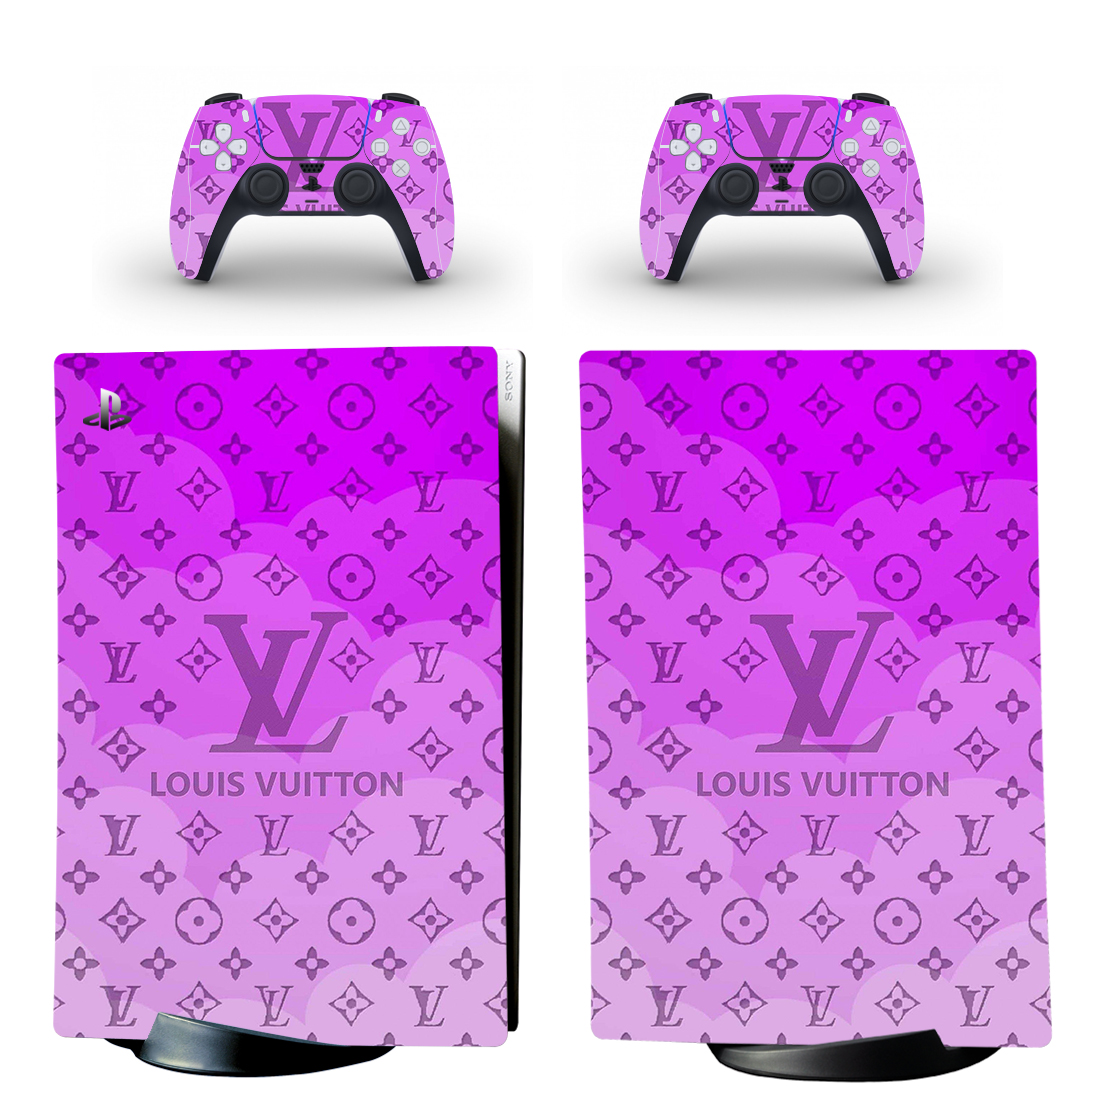 Louis Vuitton Skin Sticker For PS5 Skin And Controllers